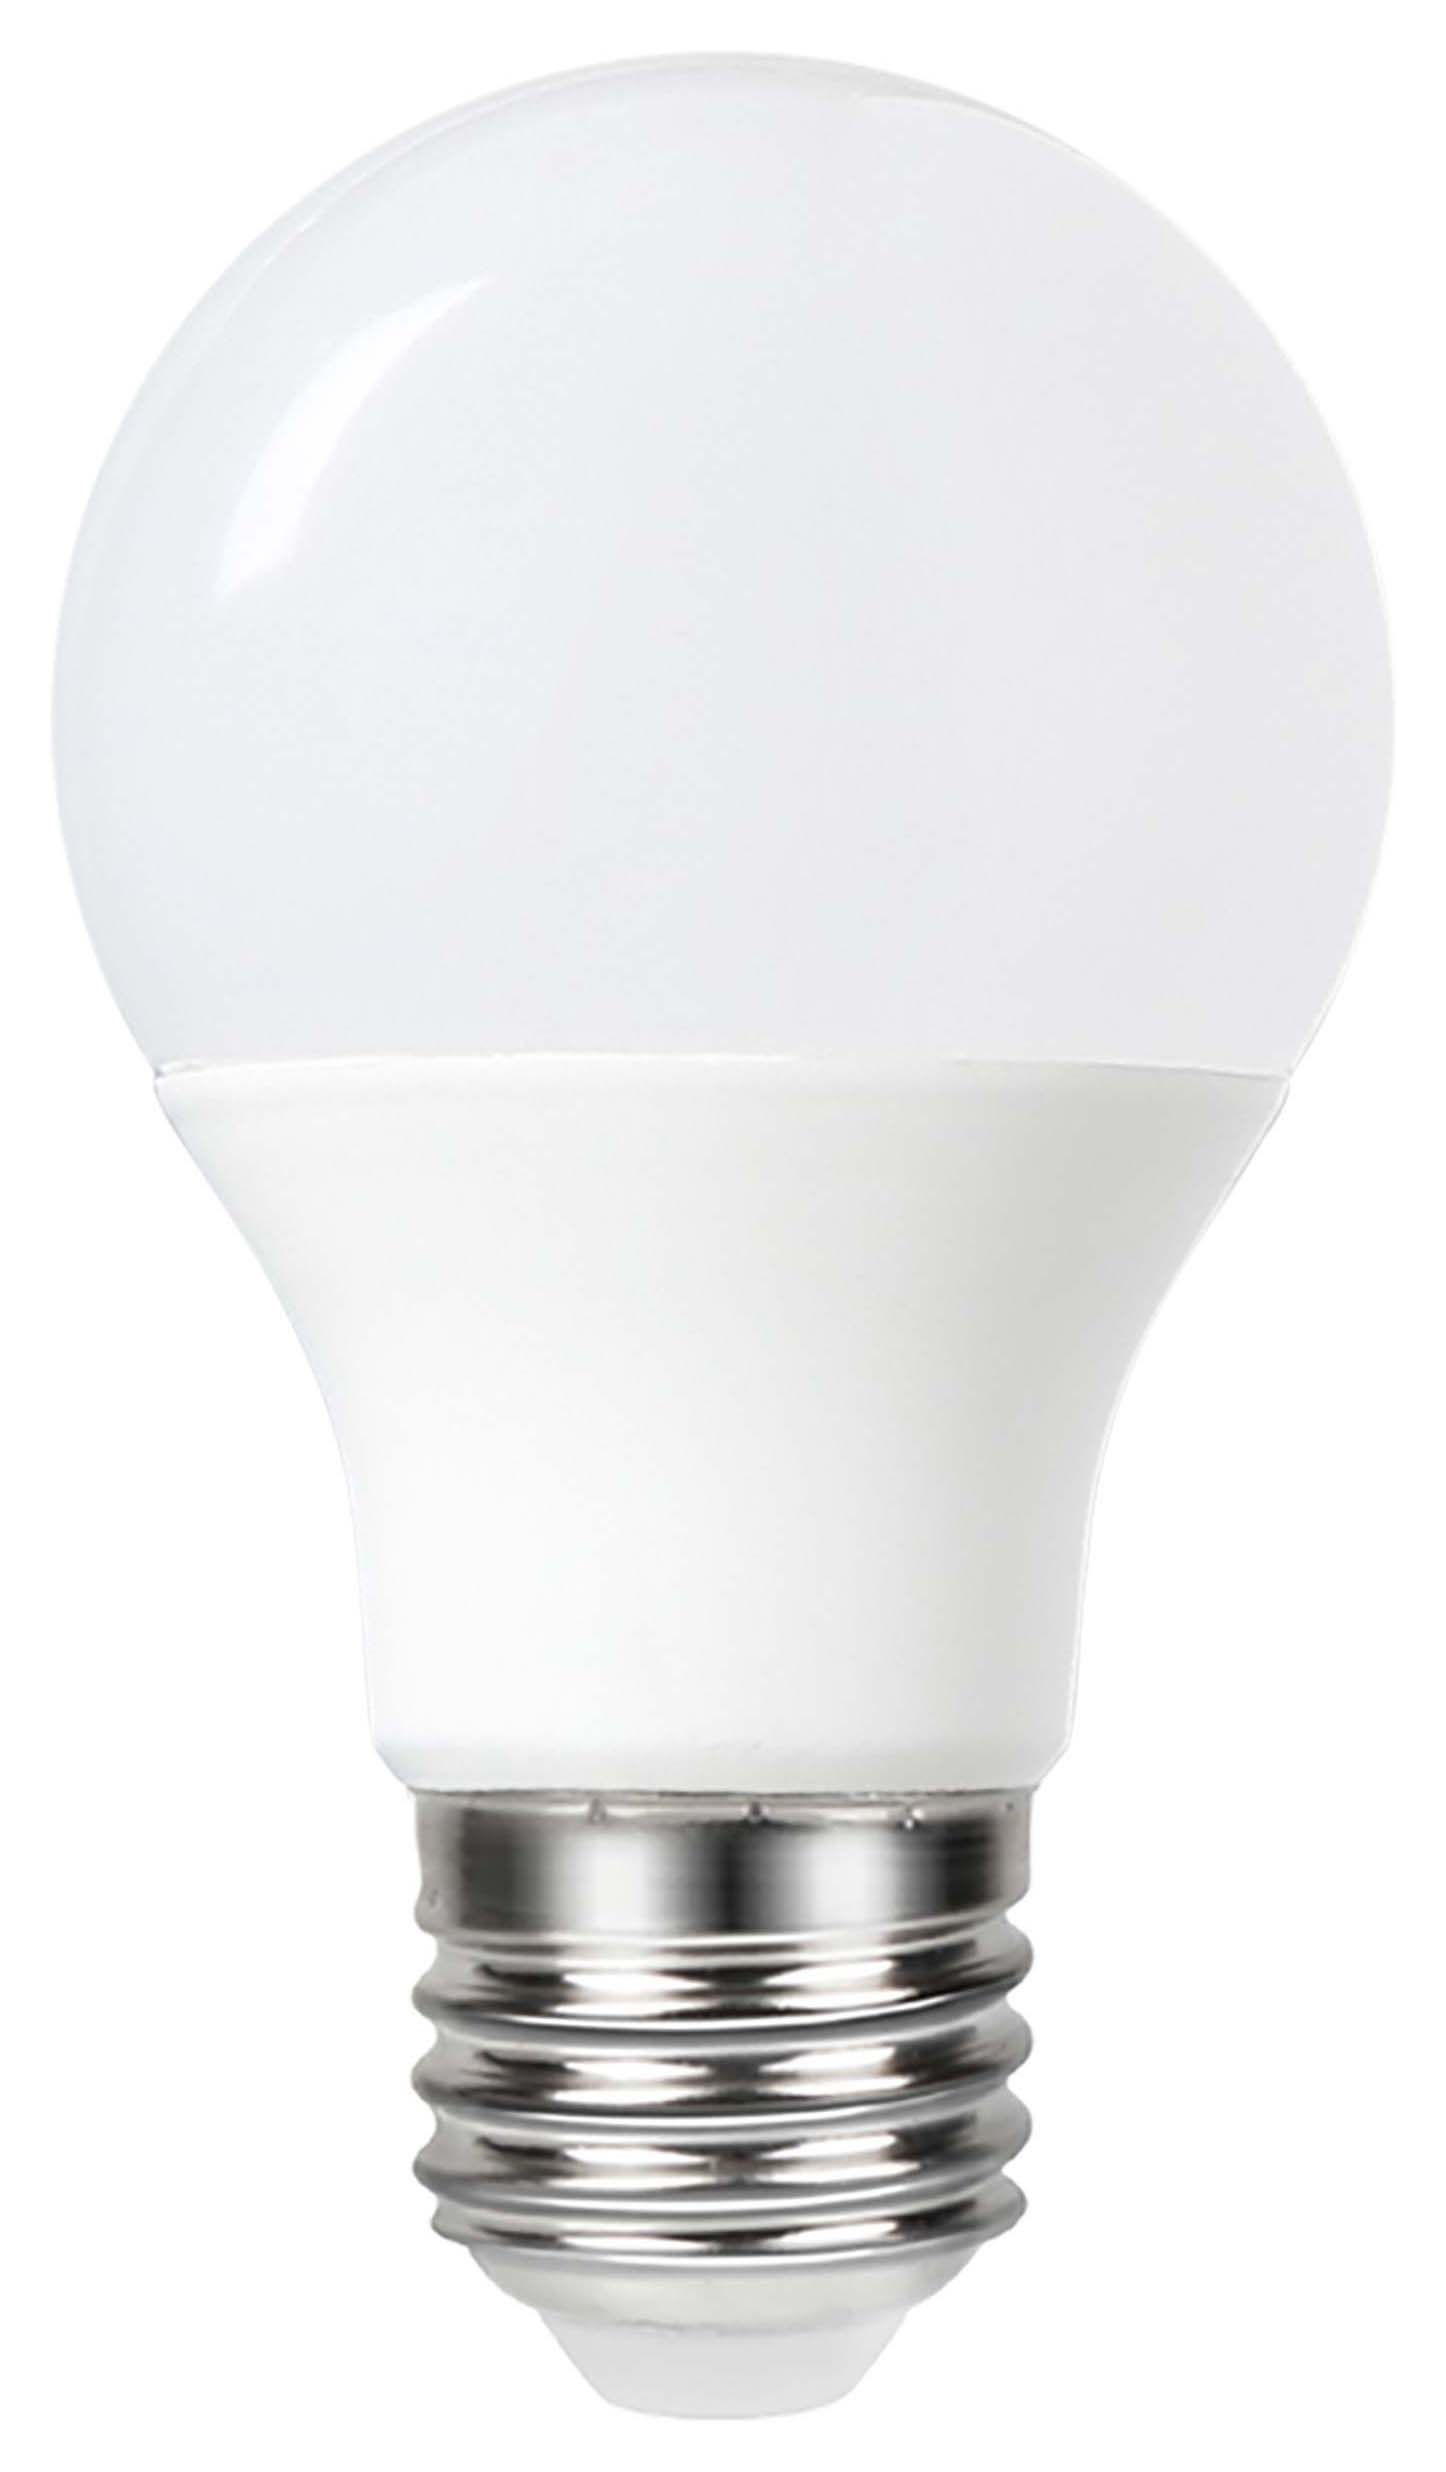 Wickes Non-Dimmable GLS Opal LED E27 13.8W Warm White Light Bulb